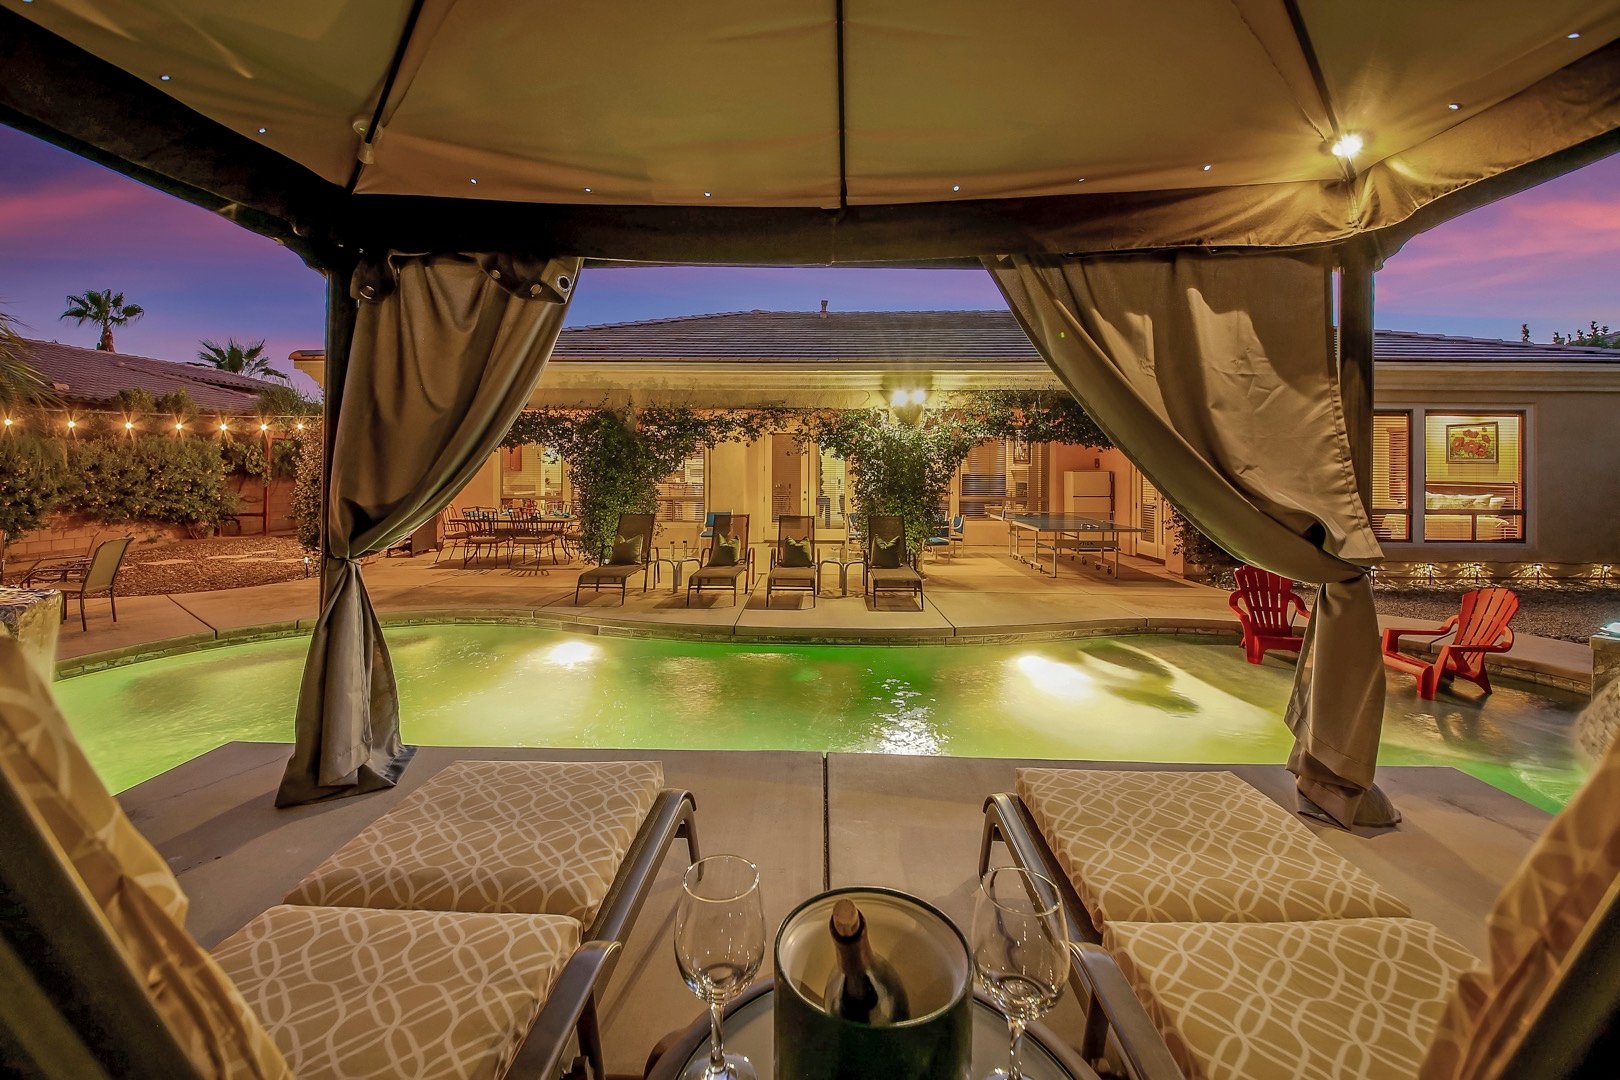 The Vegas style cabana will set the mood for a fun vacation.